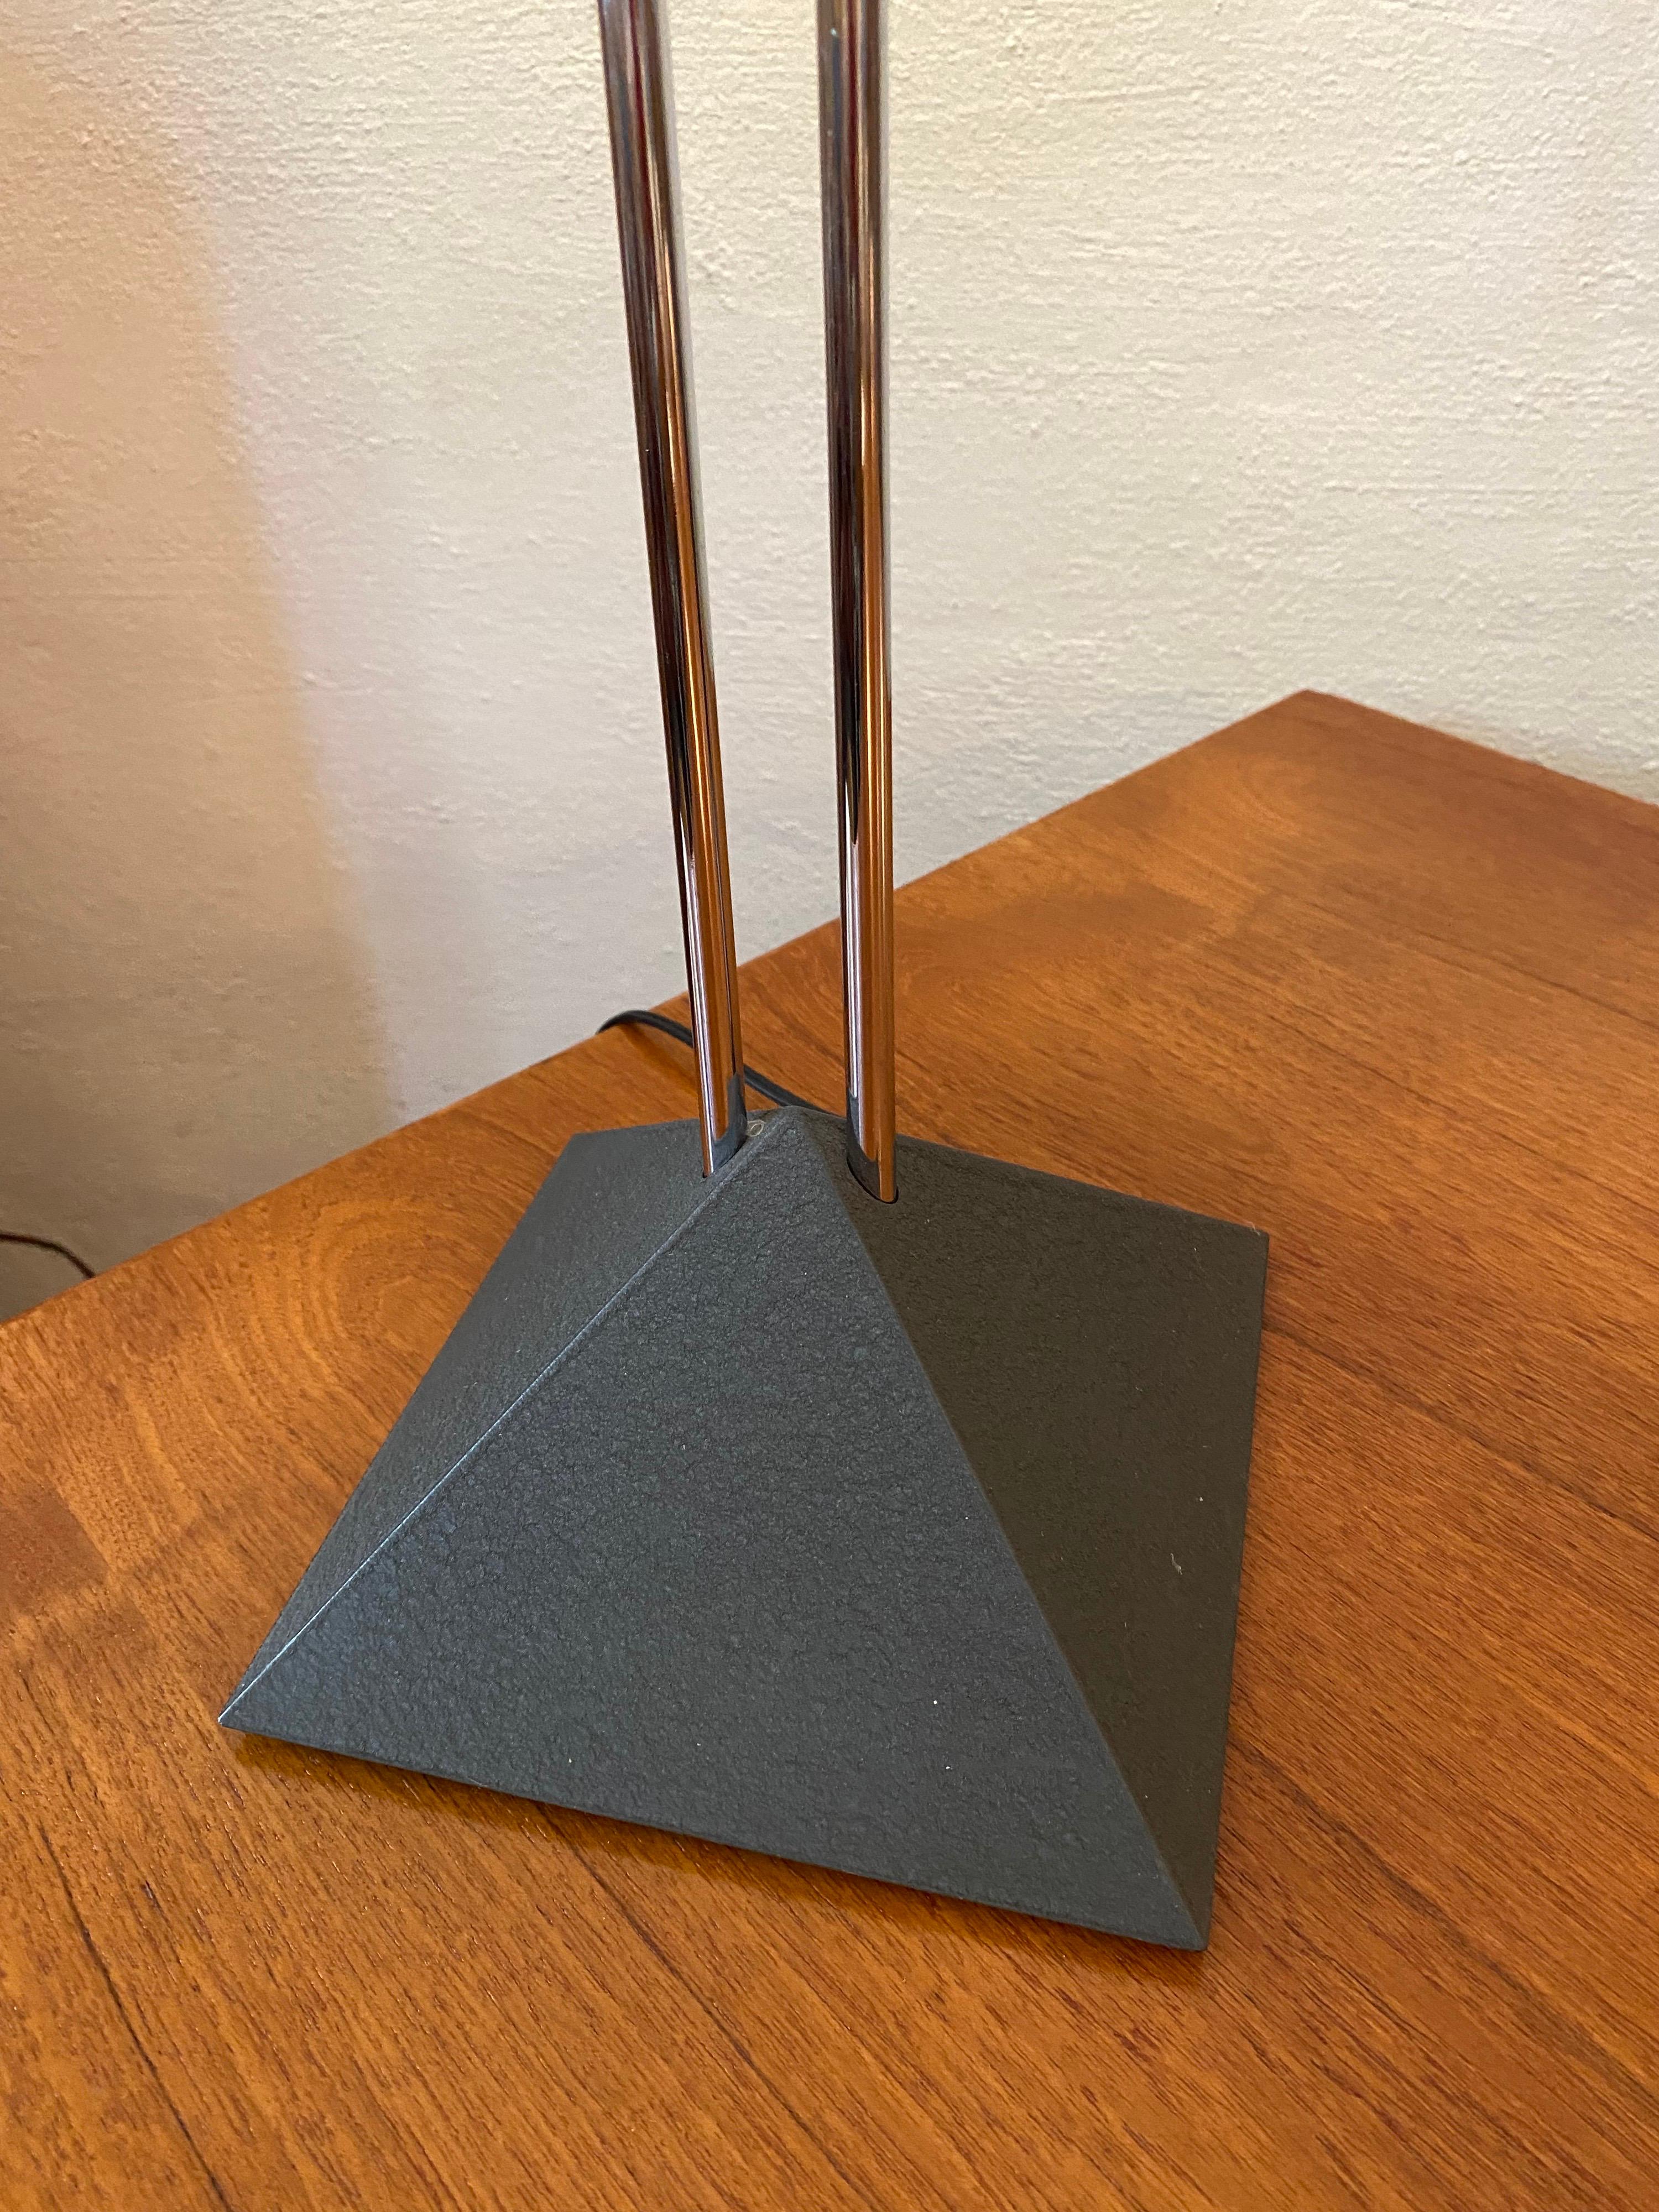 Post modern chrome floor lamp with on line dimmer. 2 simple chrome poles support square turned panels at top where the light source is hidden.